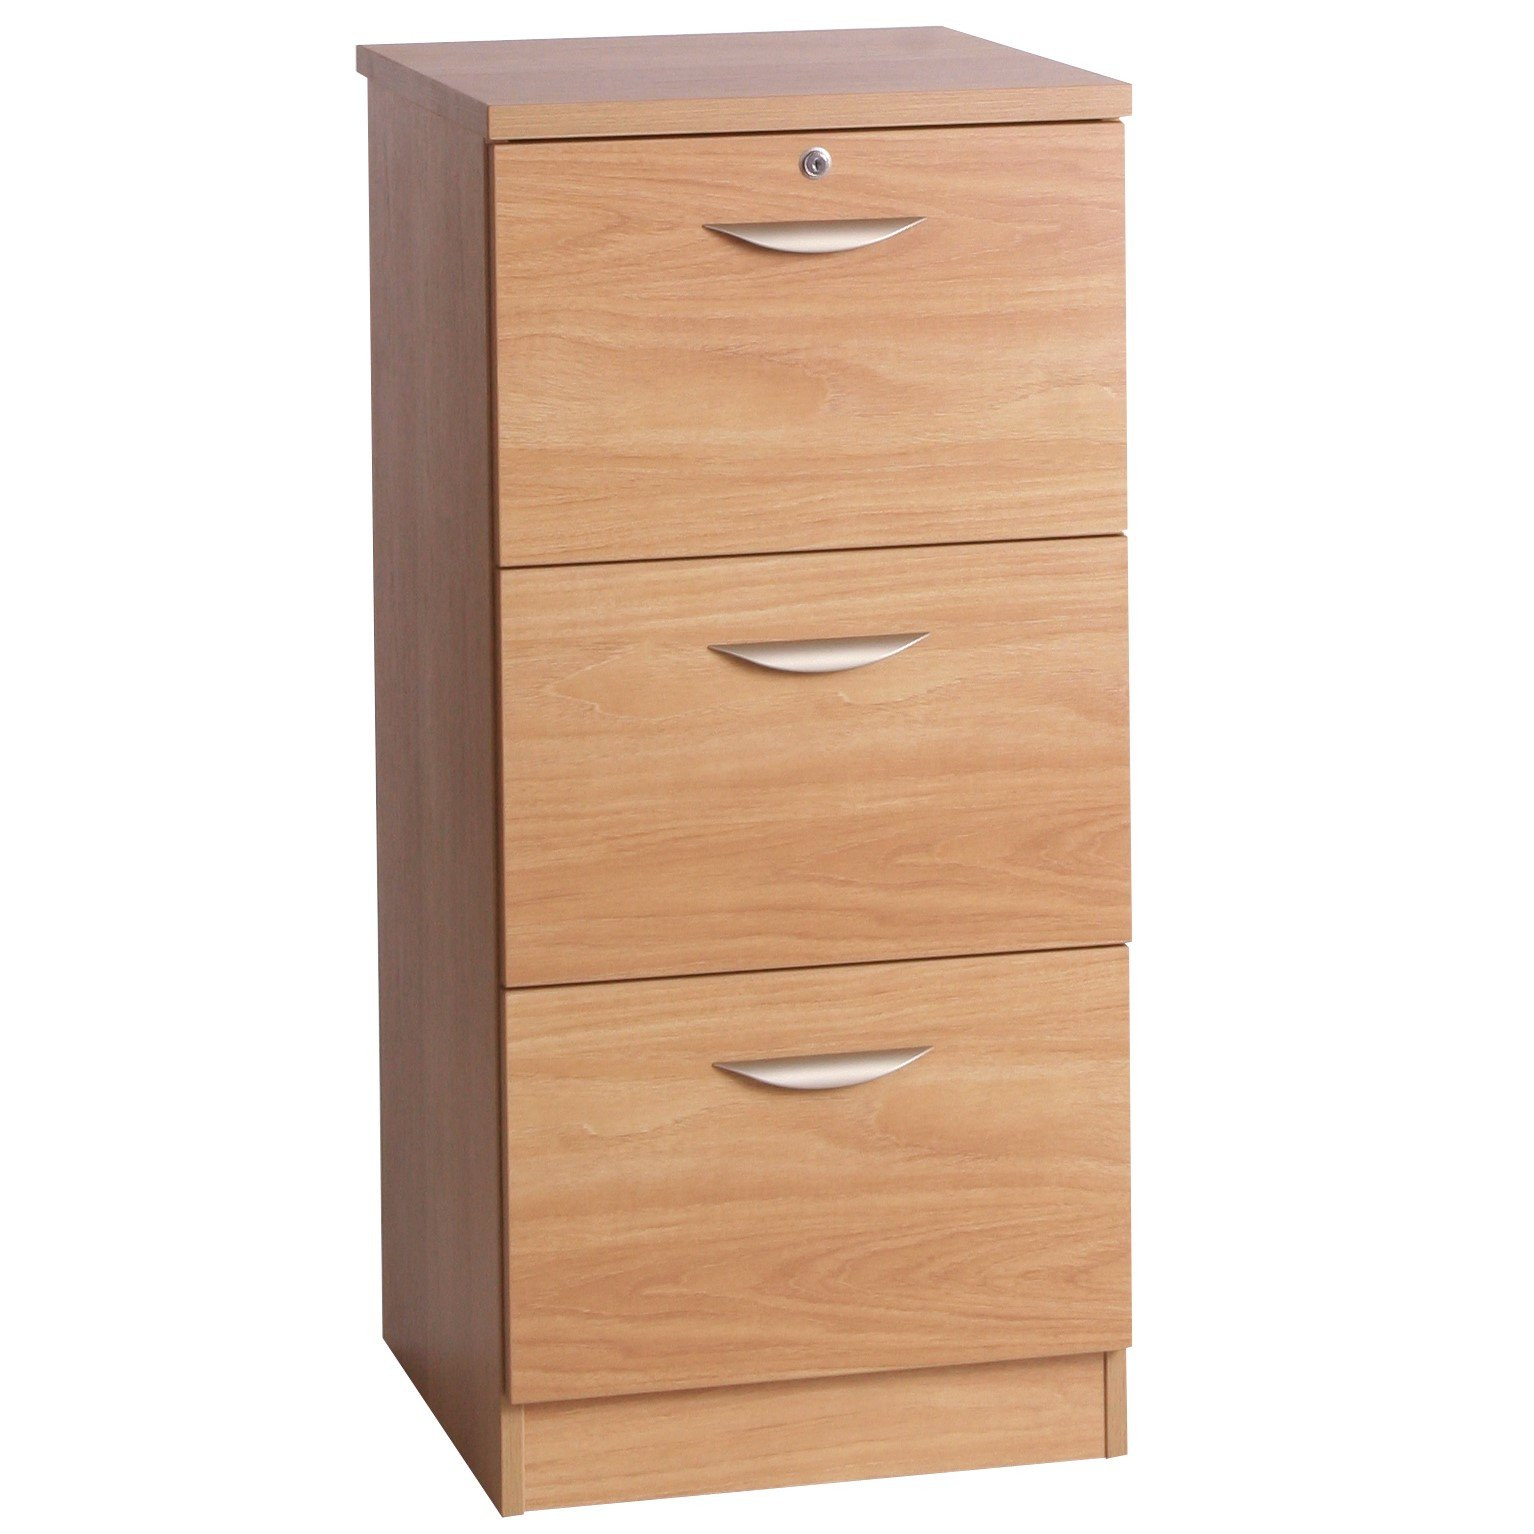 Best ideas about 3 Drawer Filing Cabinet
. Save or Pin Home fice UK 3 Drawer Filing Cabinet & Reviews Now.